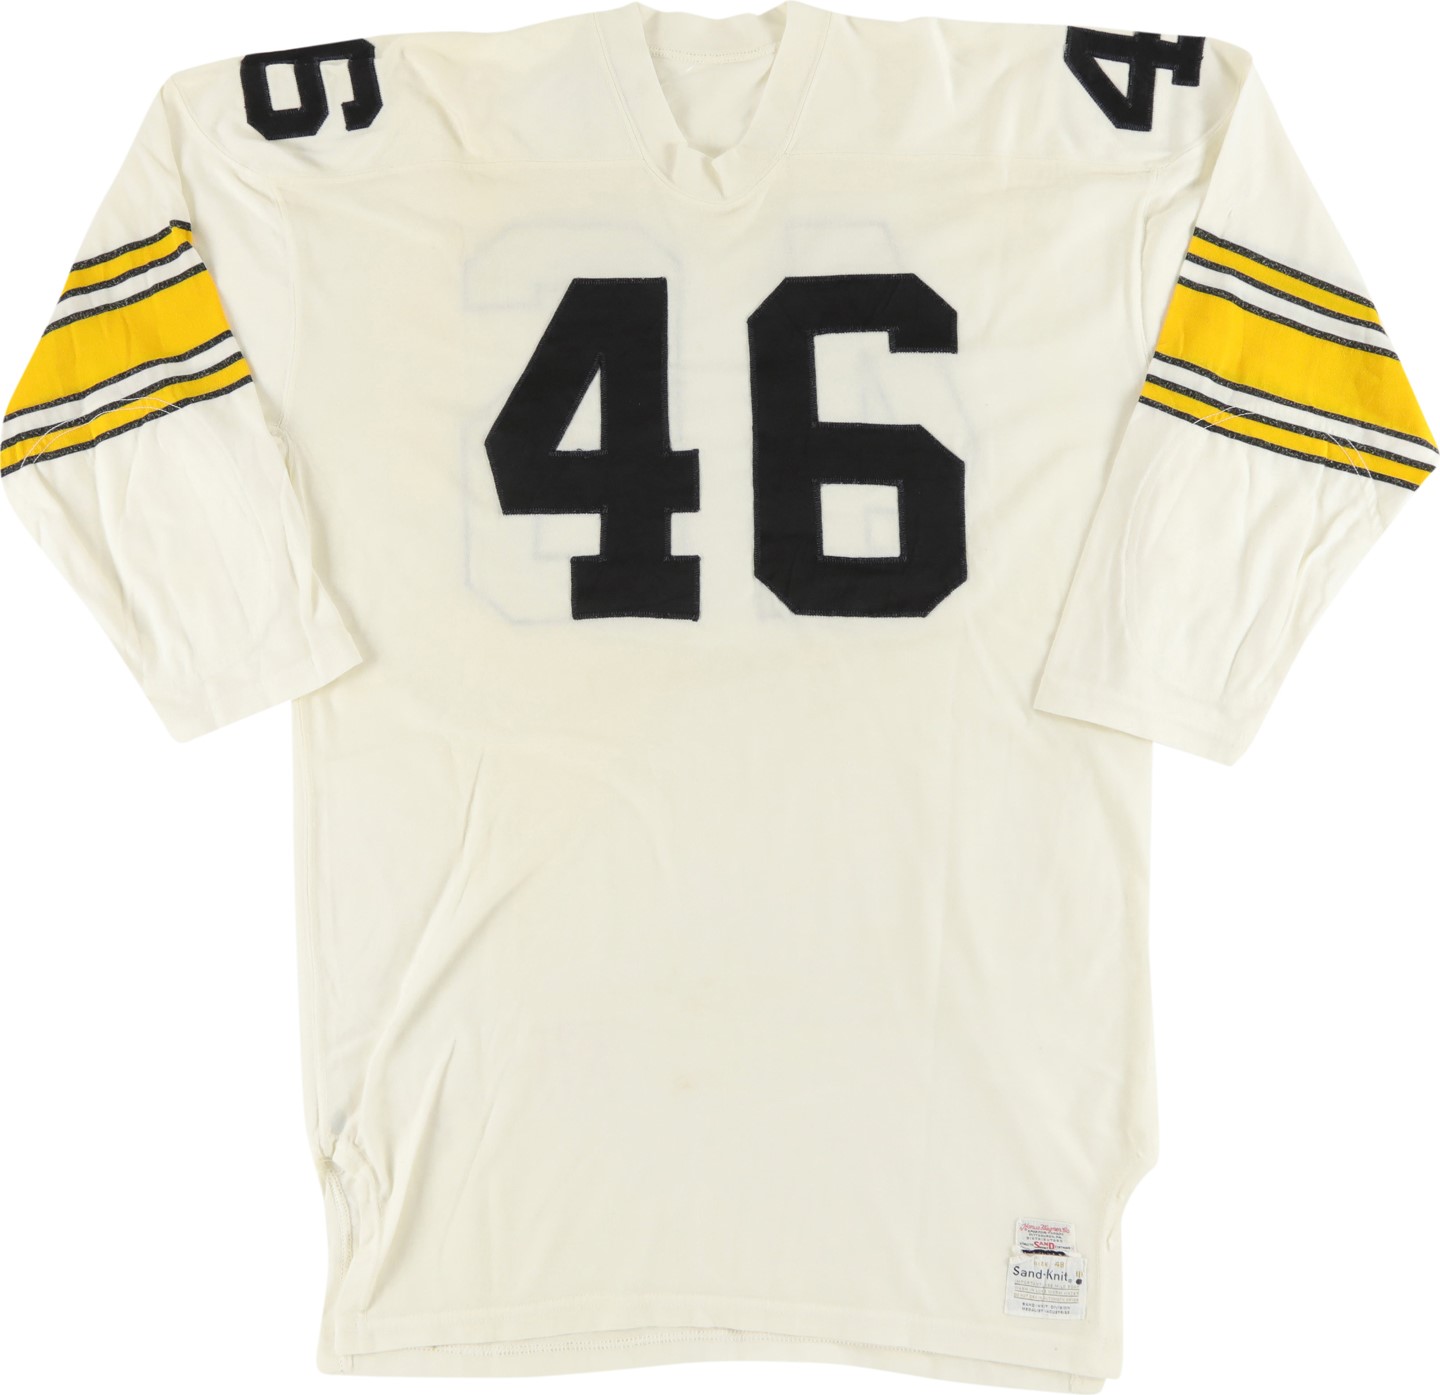 The Pittsburgh Steelers Game Worn Jersey Archive - Circa 1960s #46 Blank Pittsburgh Steelers Game Worn Jersey